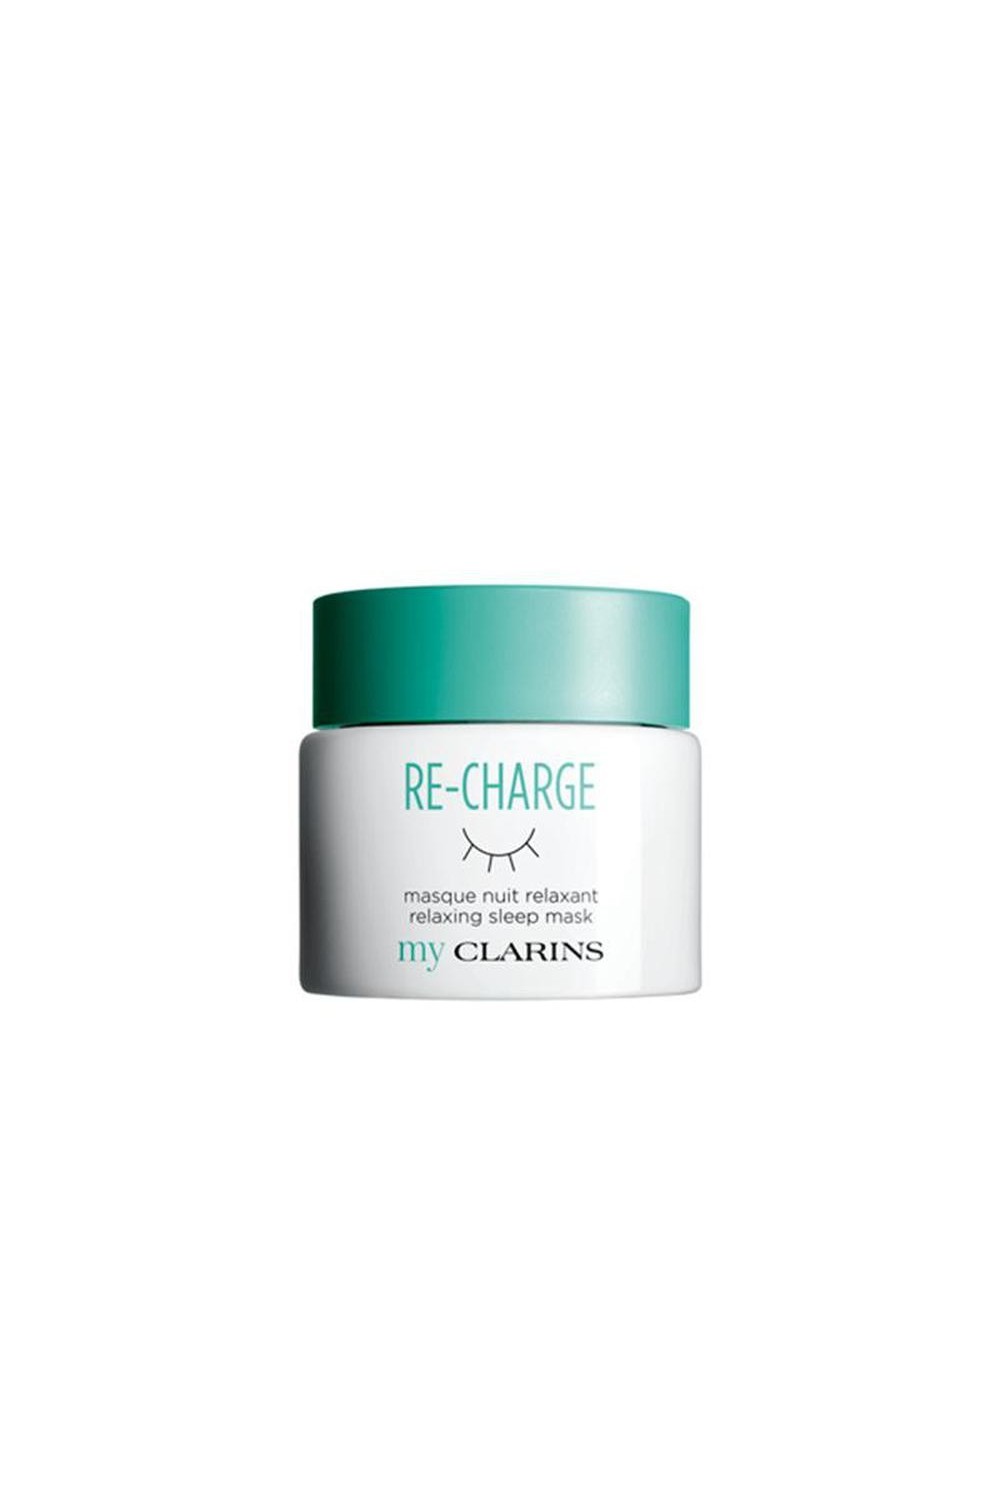 My Clarins Re-Charge Relaxing Sleep Mask 50ml